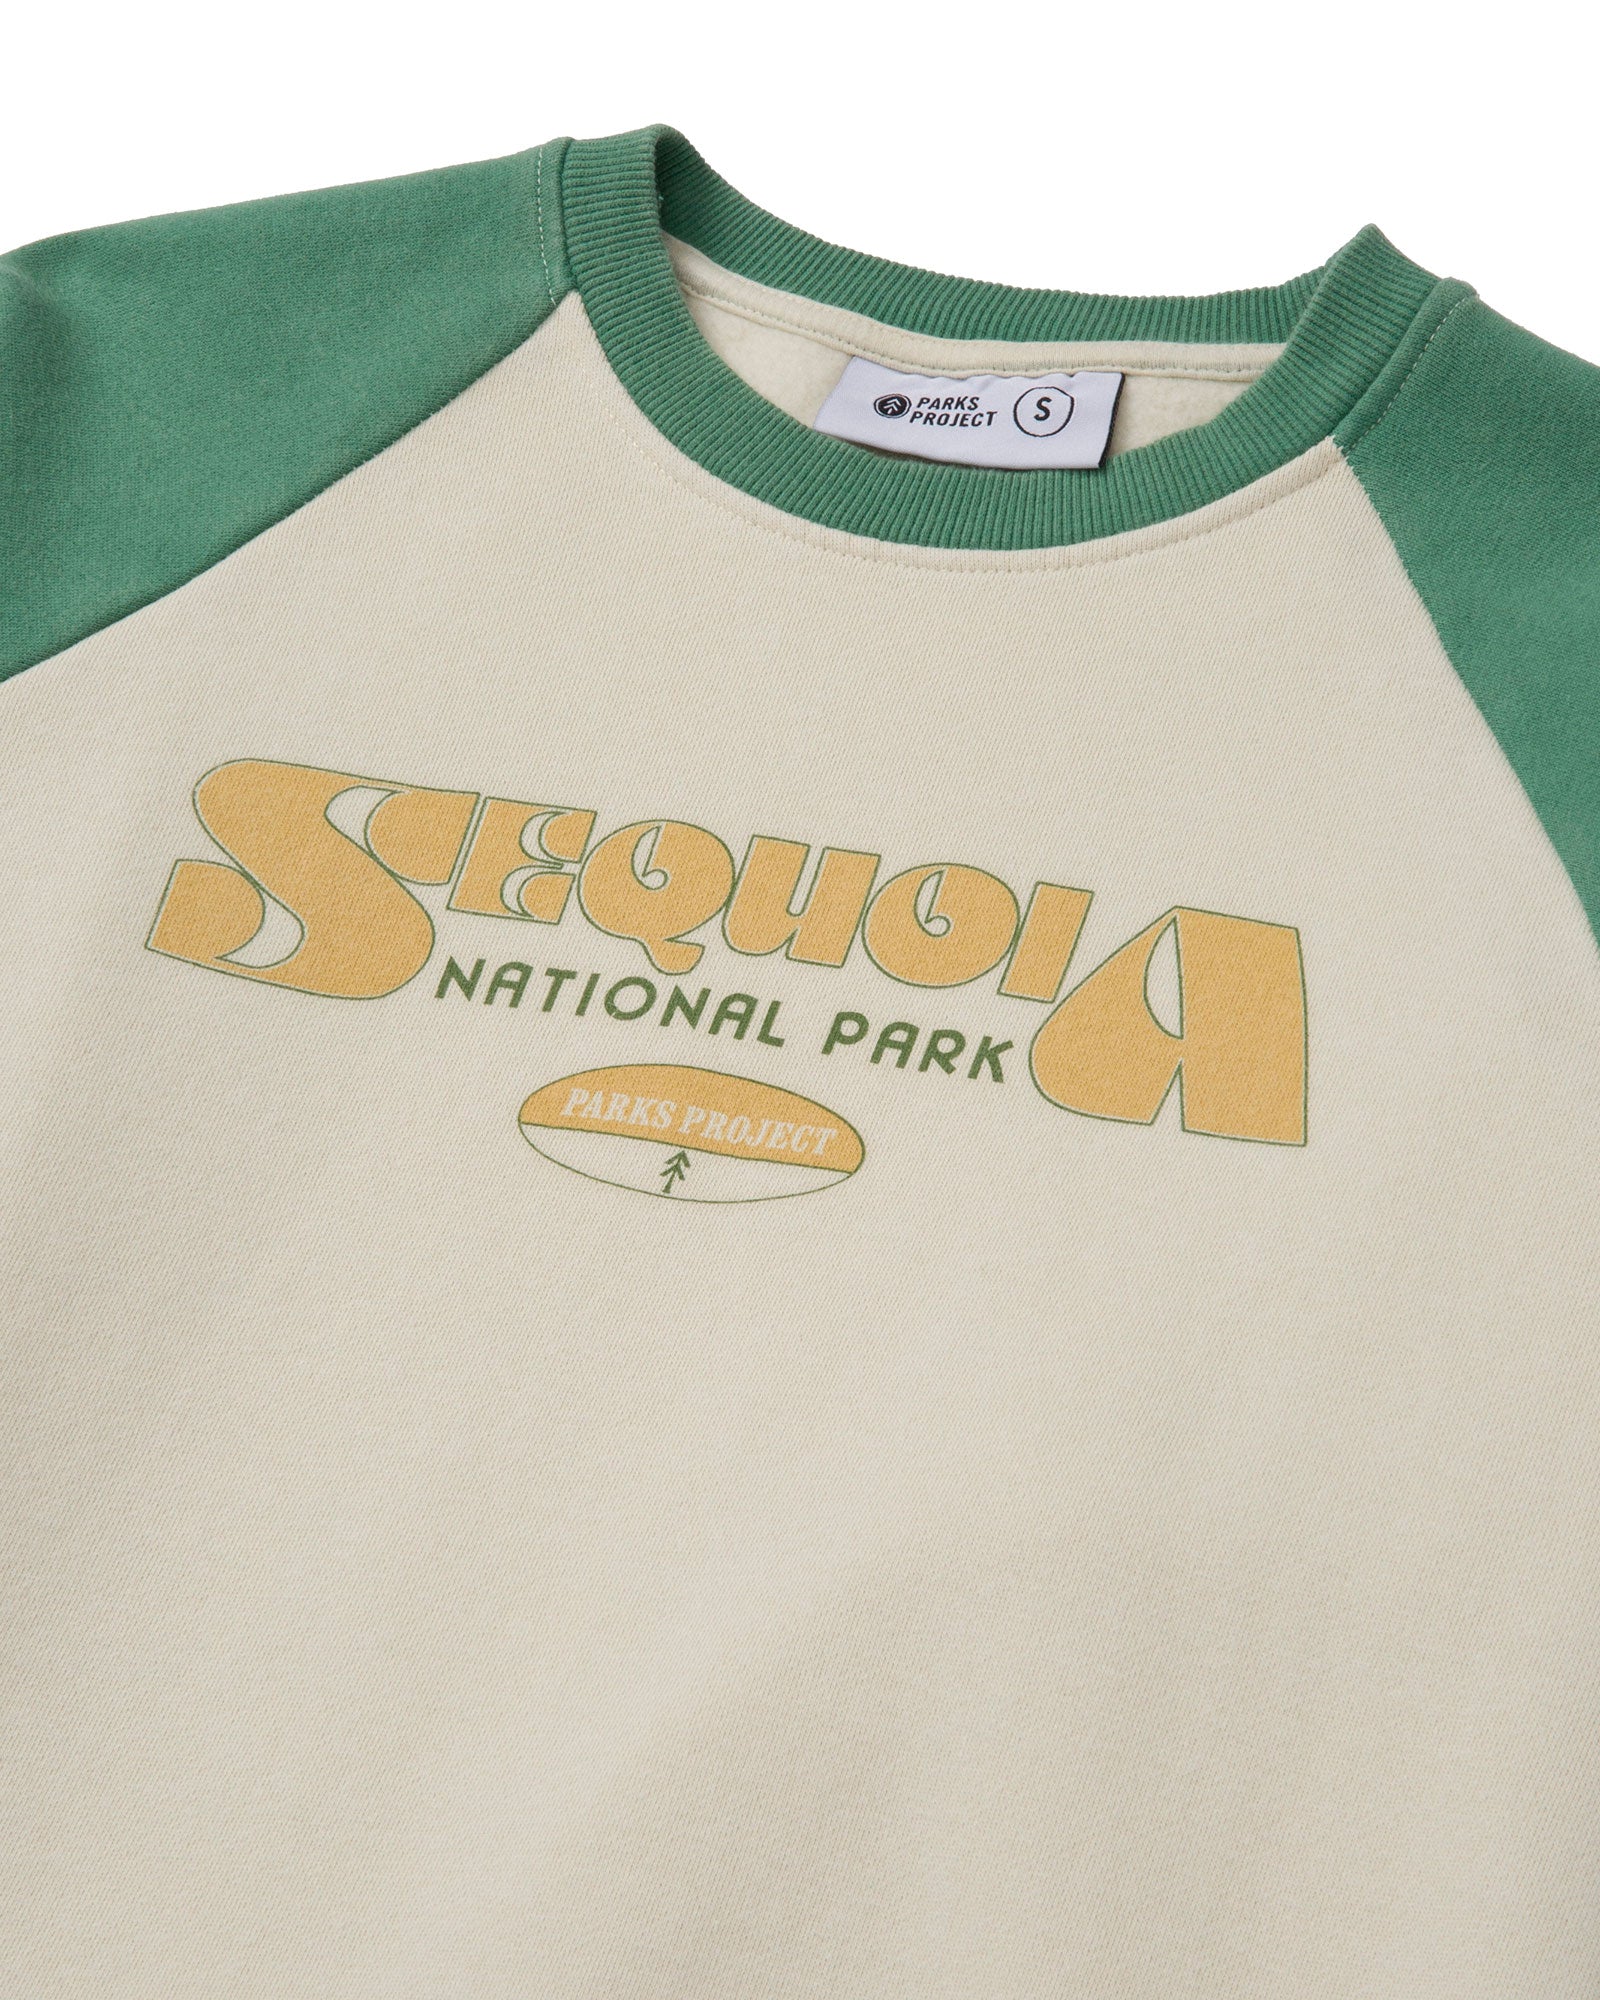 Sequoia Greatest Hits Raglan Crew Inspired by Sequoia National